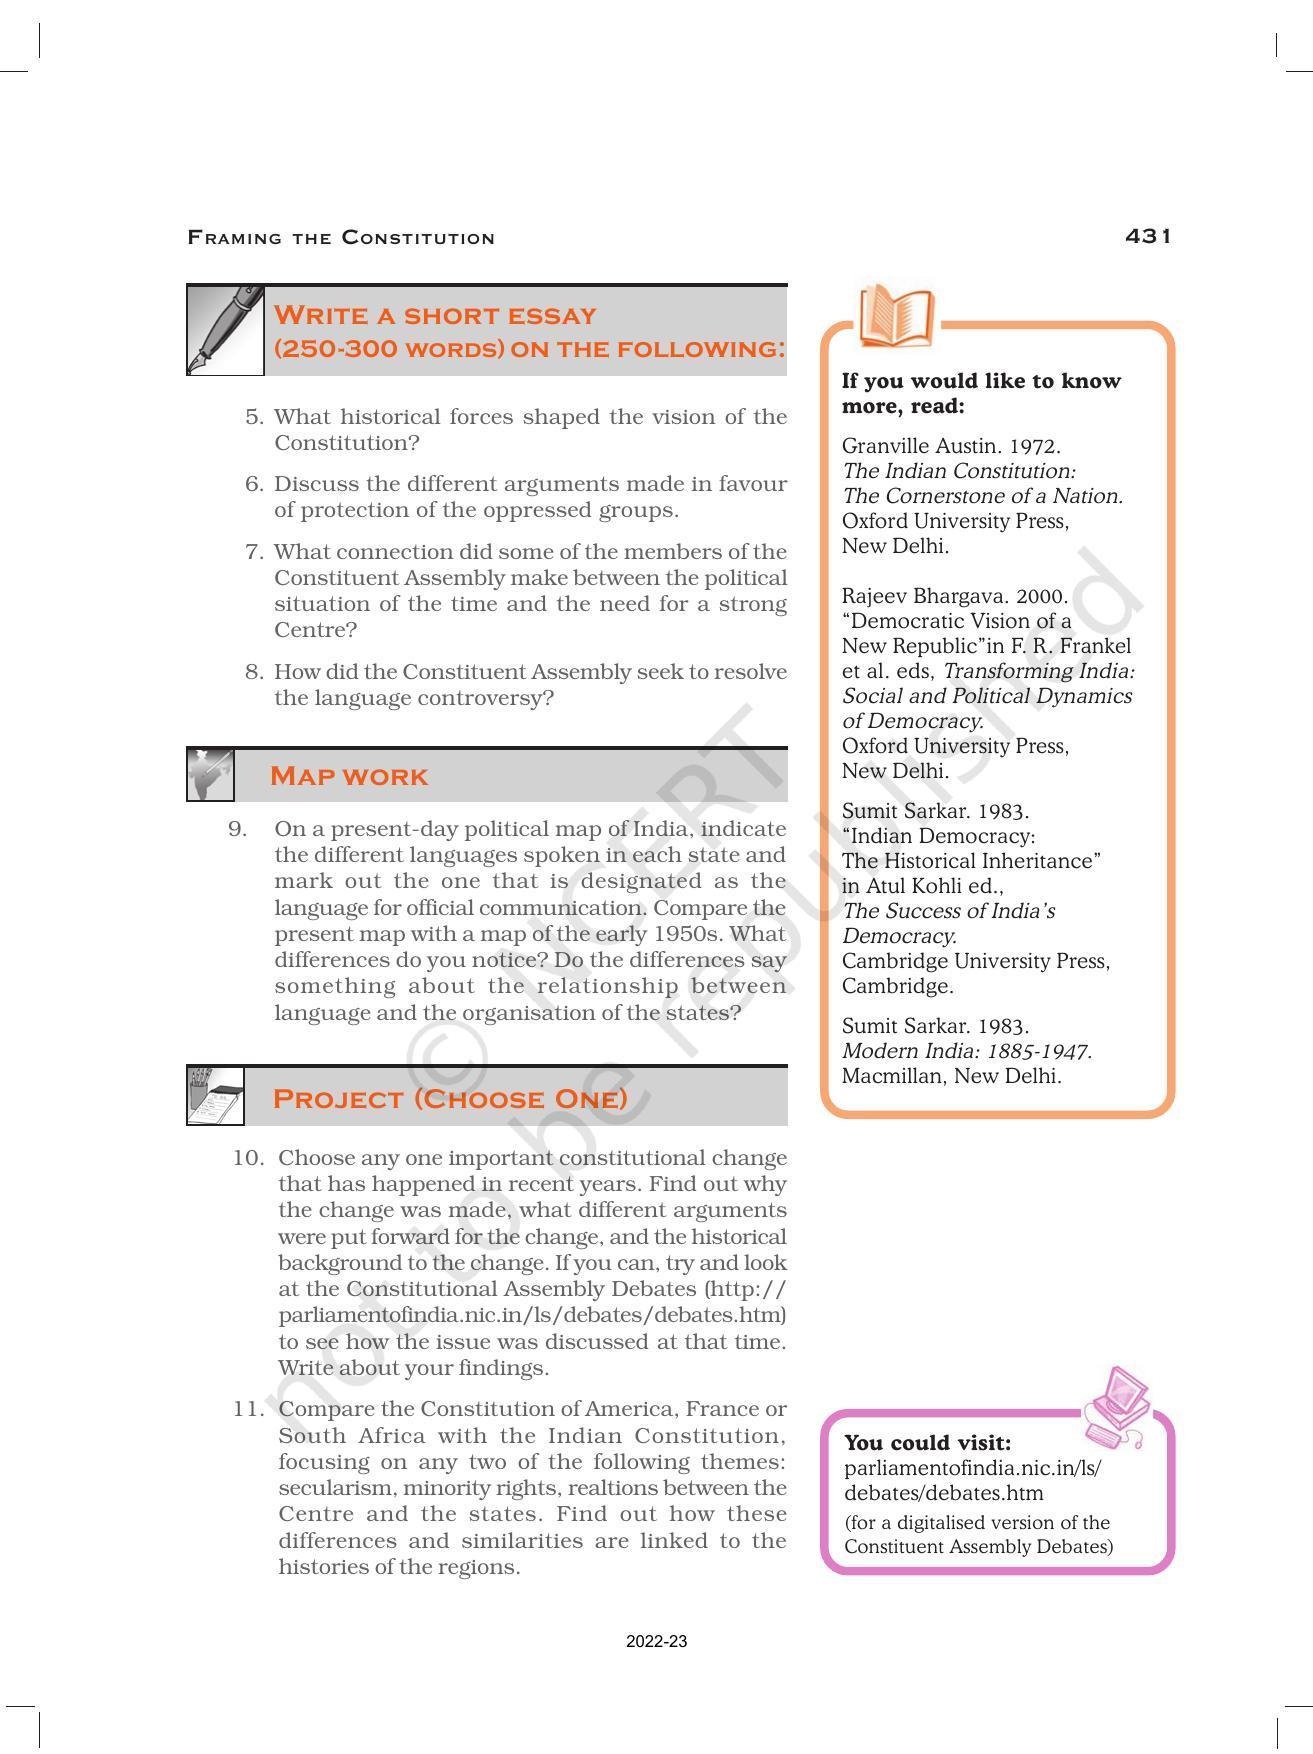 NCERT Book for Class 12 History (Part-III) Chapter 15 Framing and the Constitution - Page 27